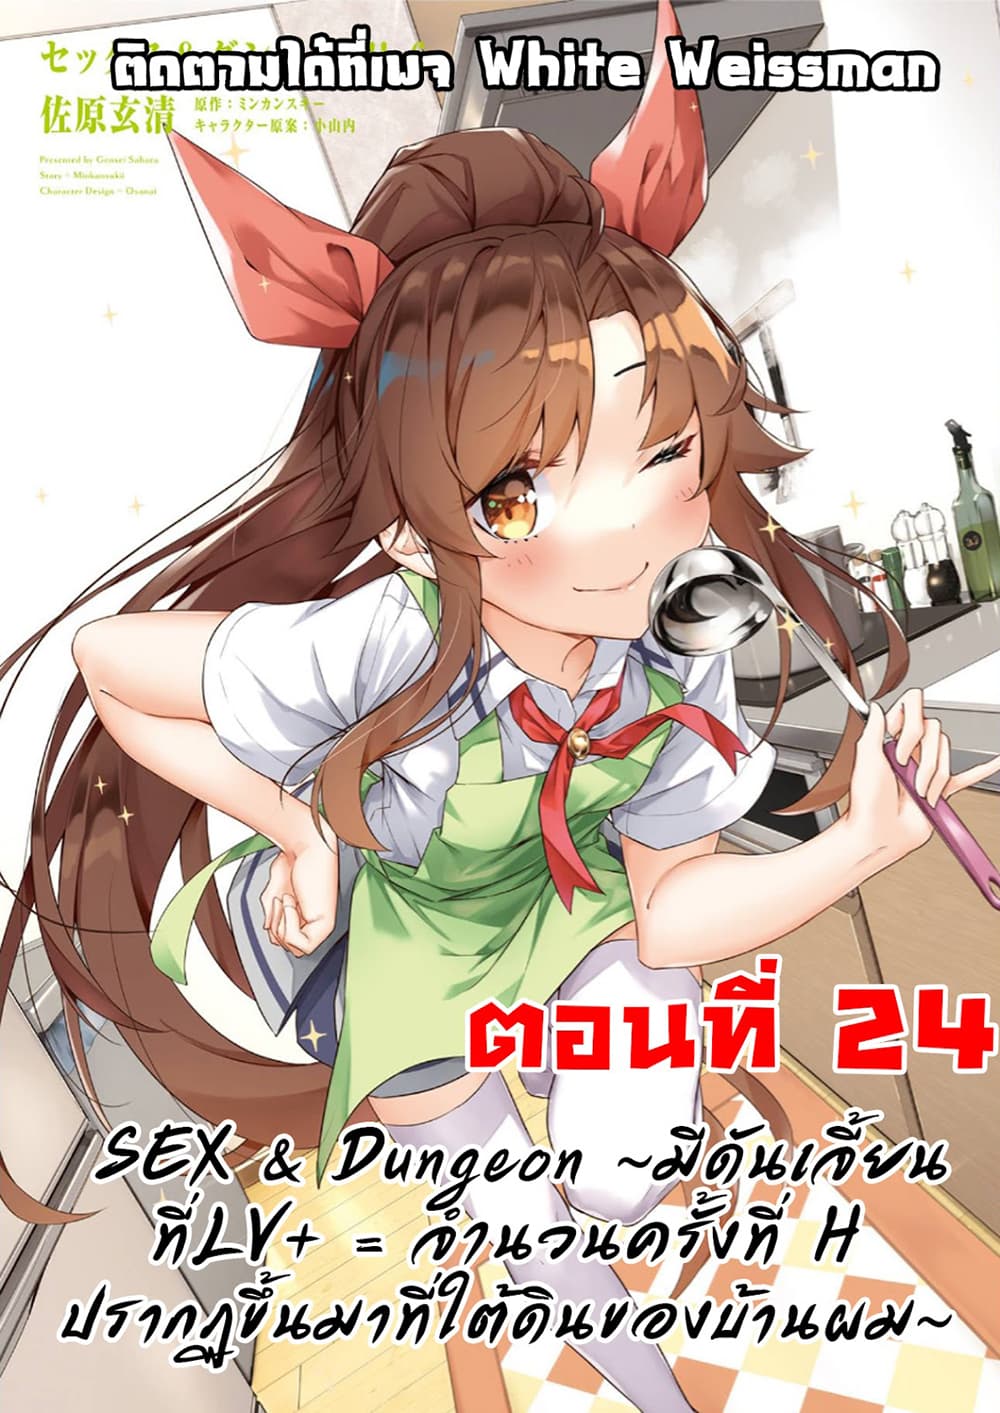 Sex and Dungeon 24 01